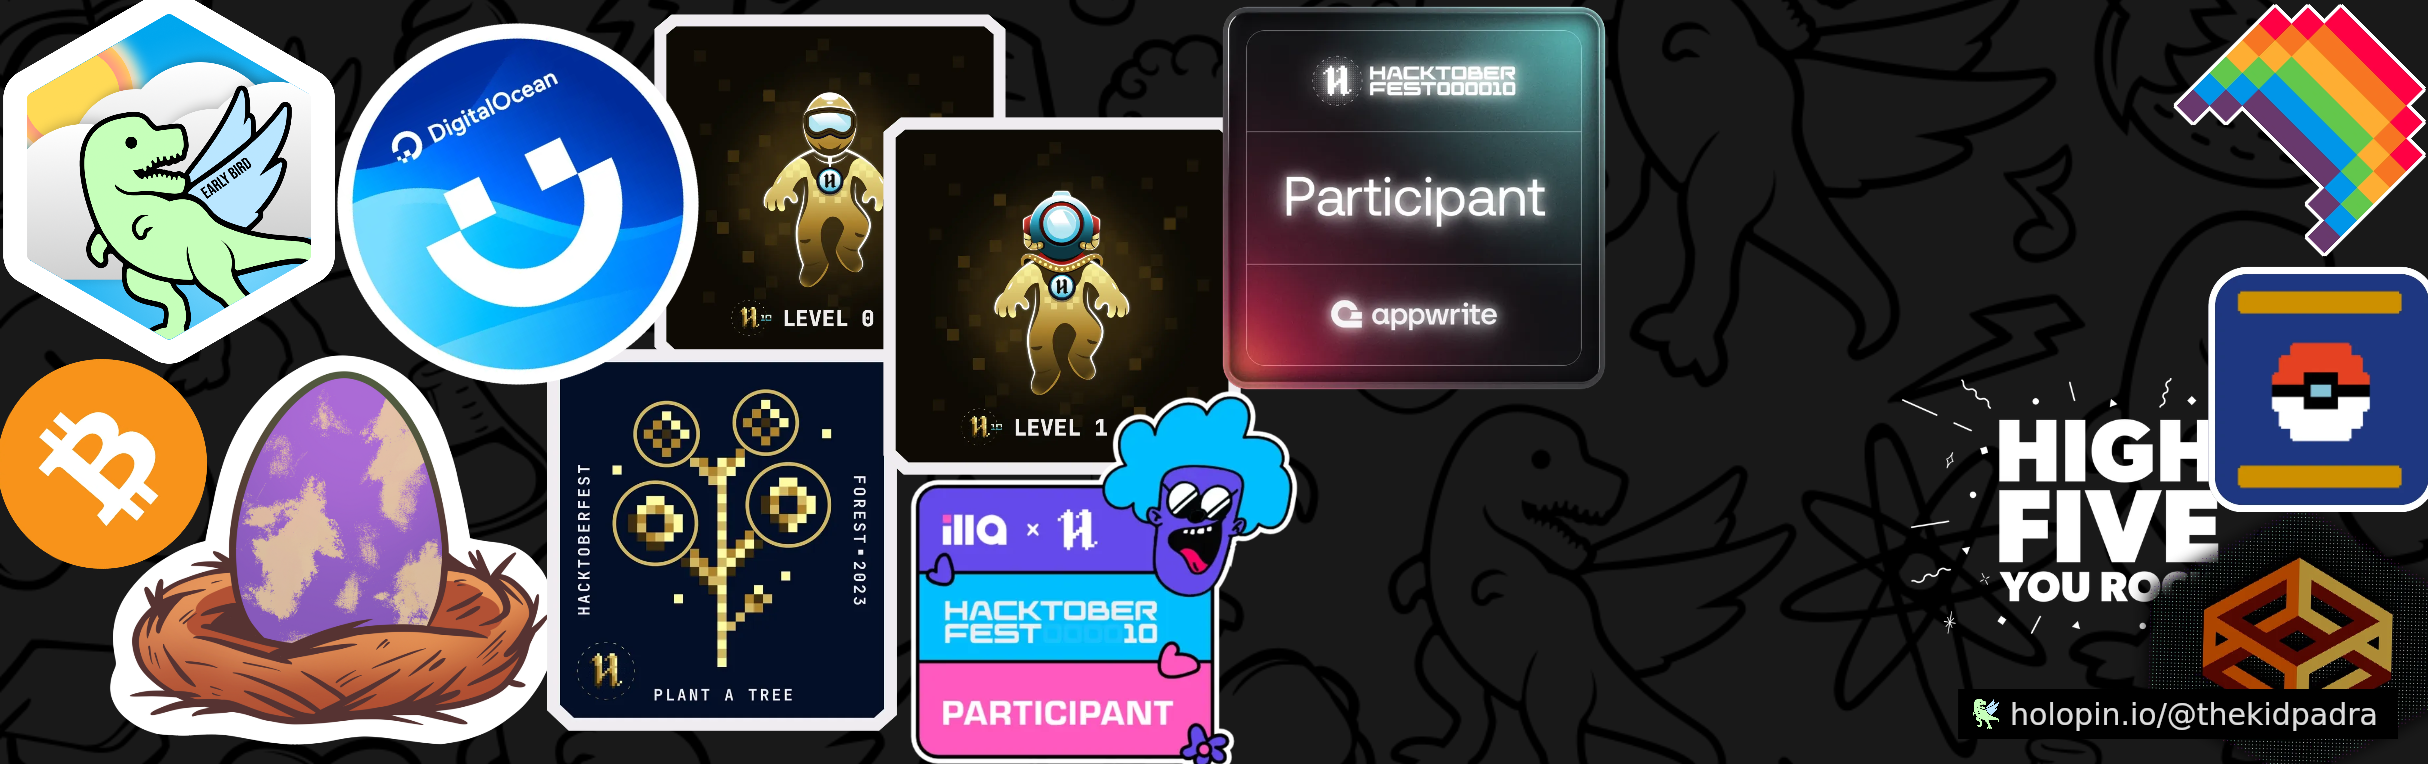 An image of @thekidpadra's Holopin badges, which is a link to view their full Holopin profile